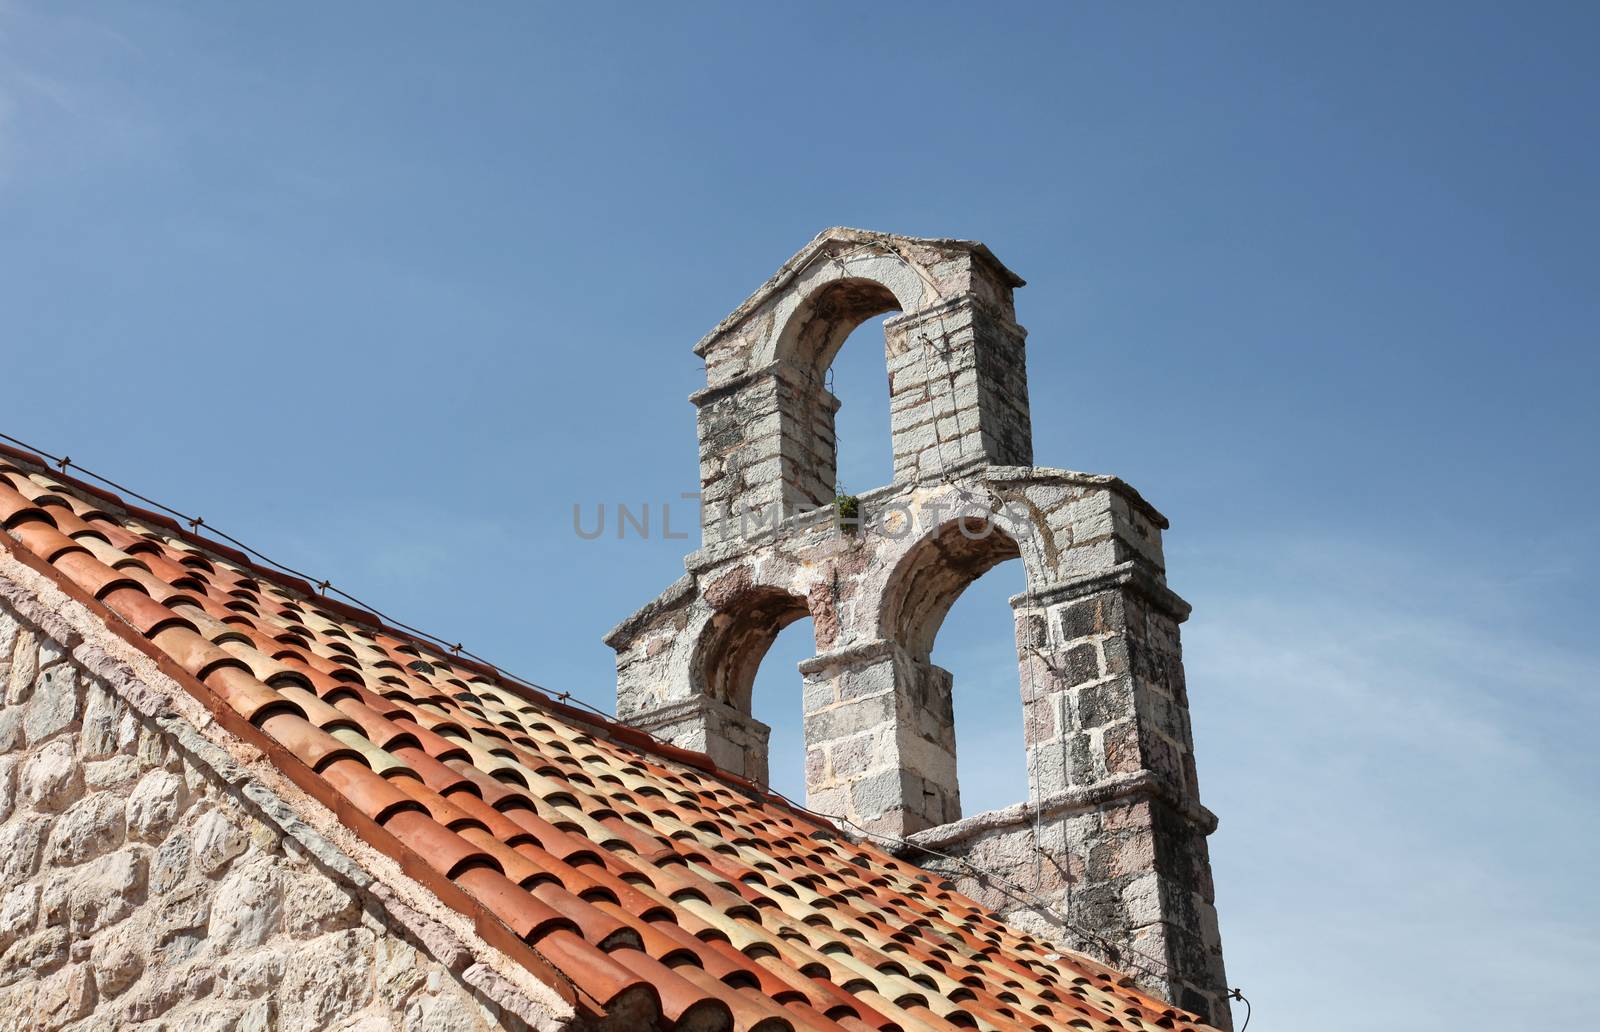 The bell tower of the church of Saint Mary in Punta, Budva, Montenegro by atlas